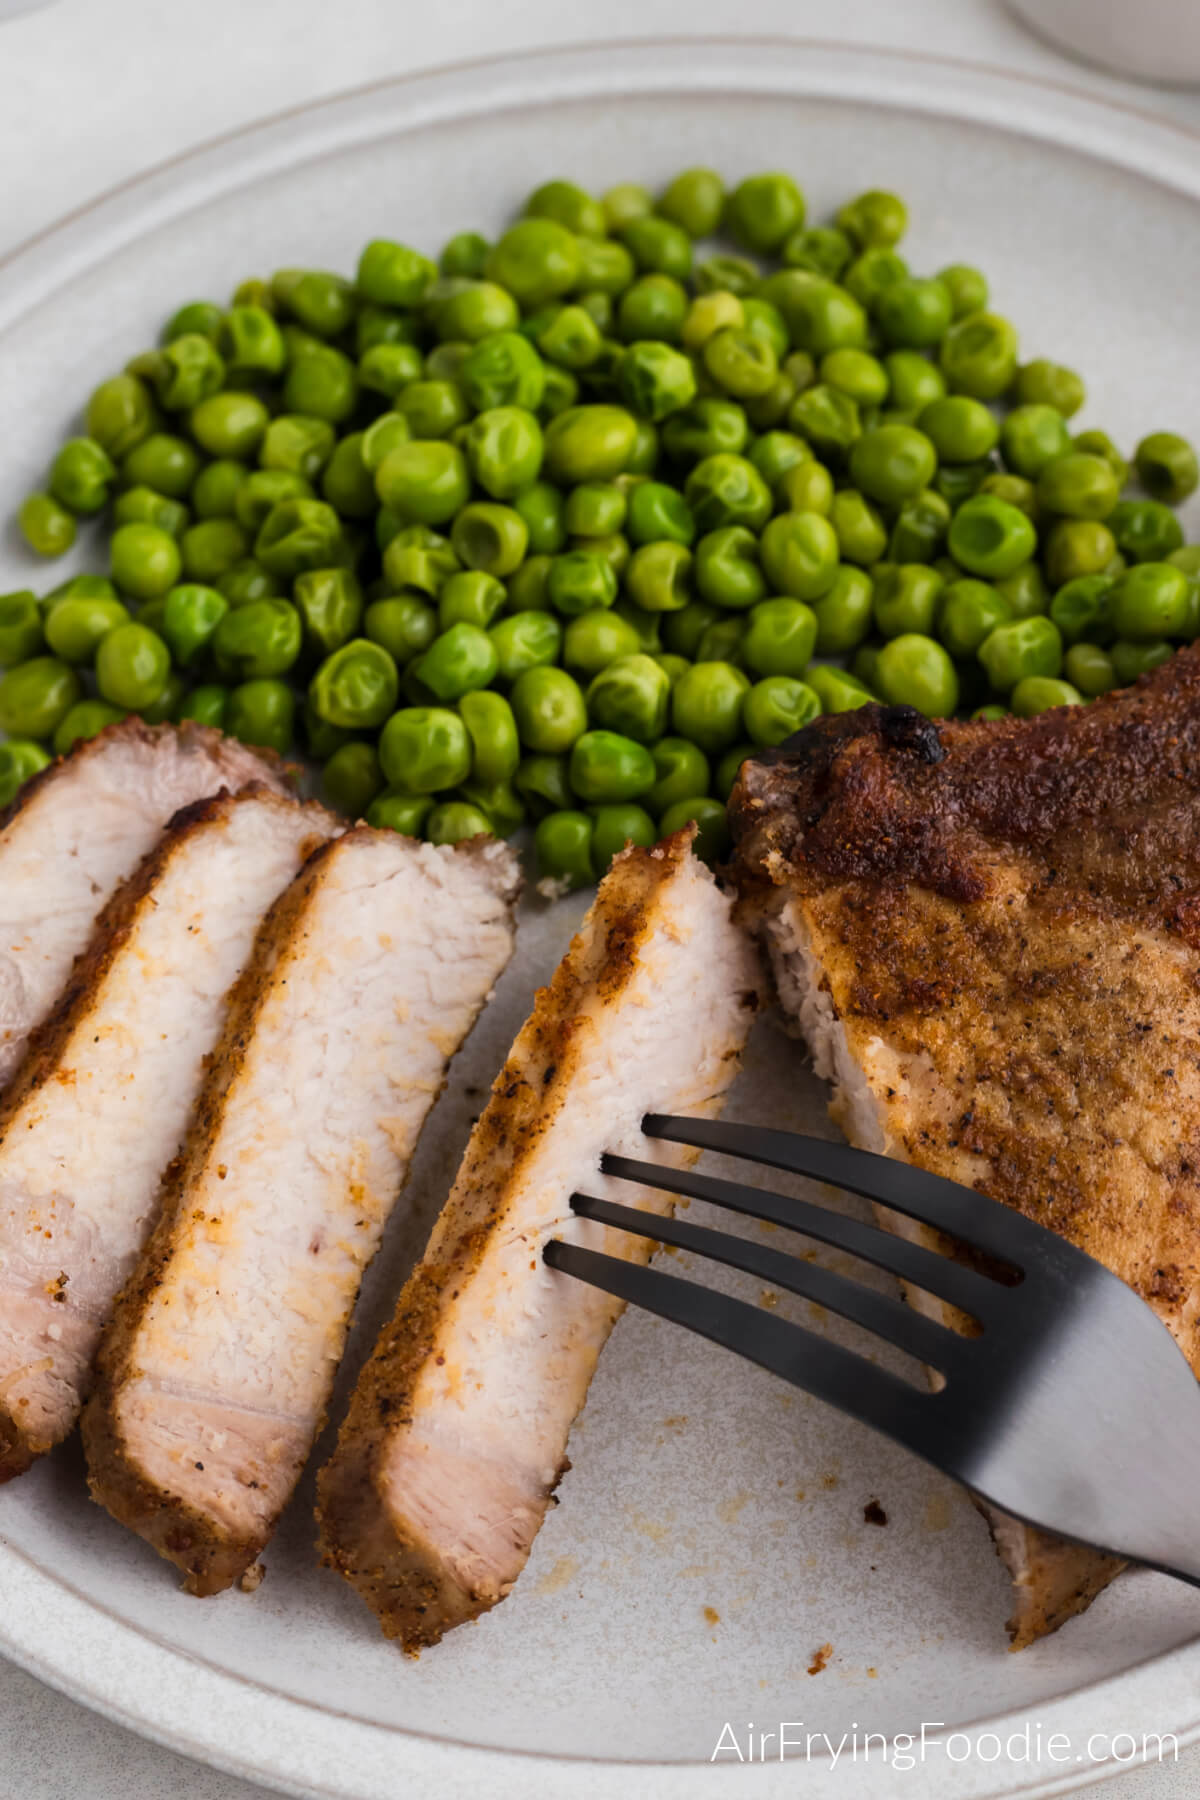 Sliced pork steak on a white plate with a side of cooked green peas.